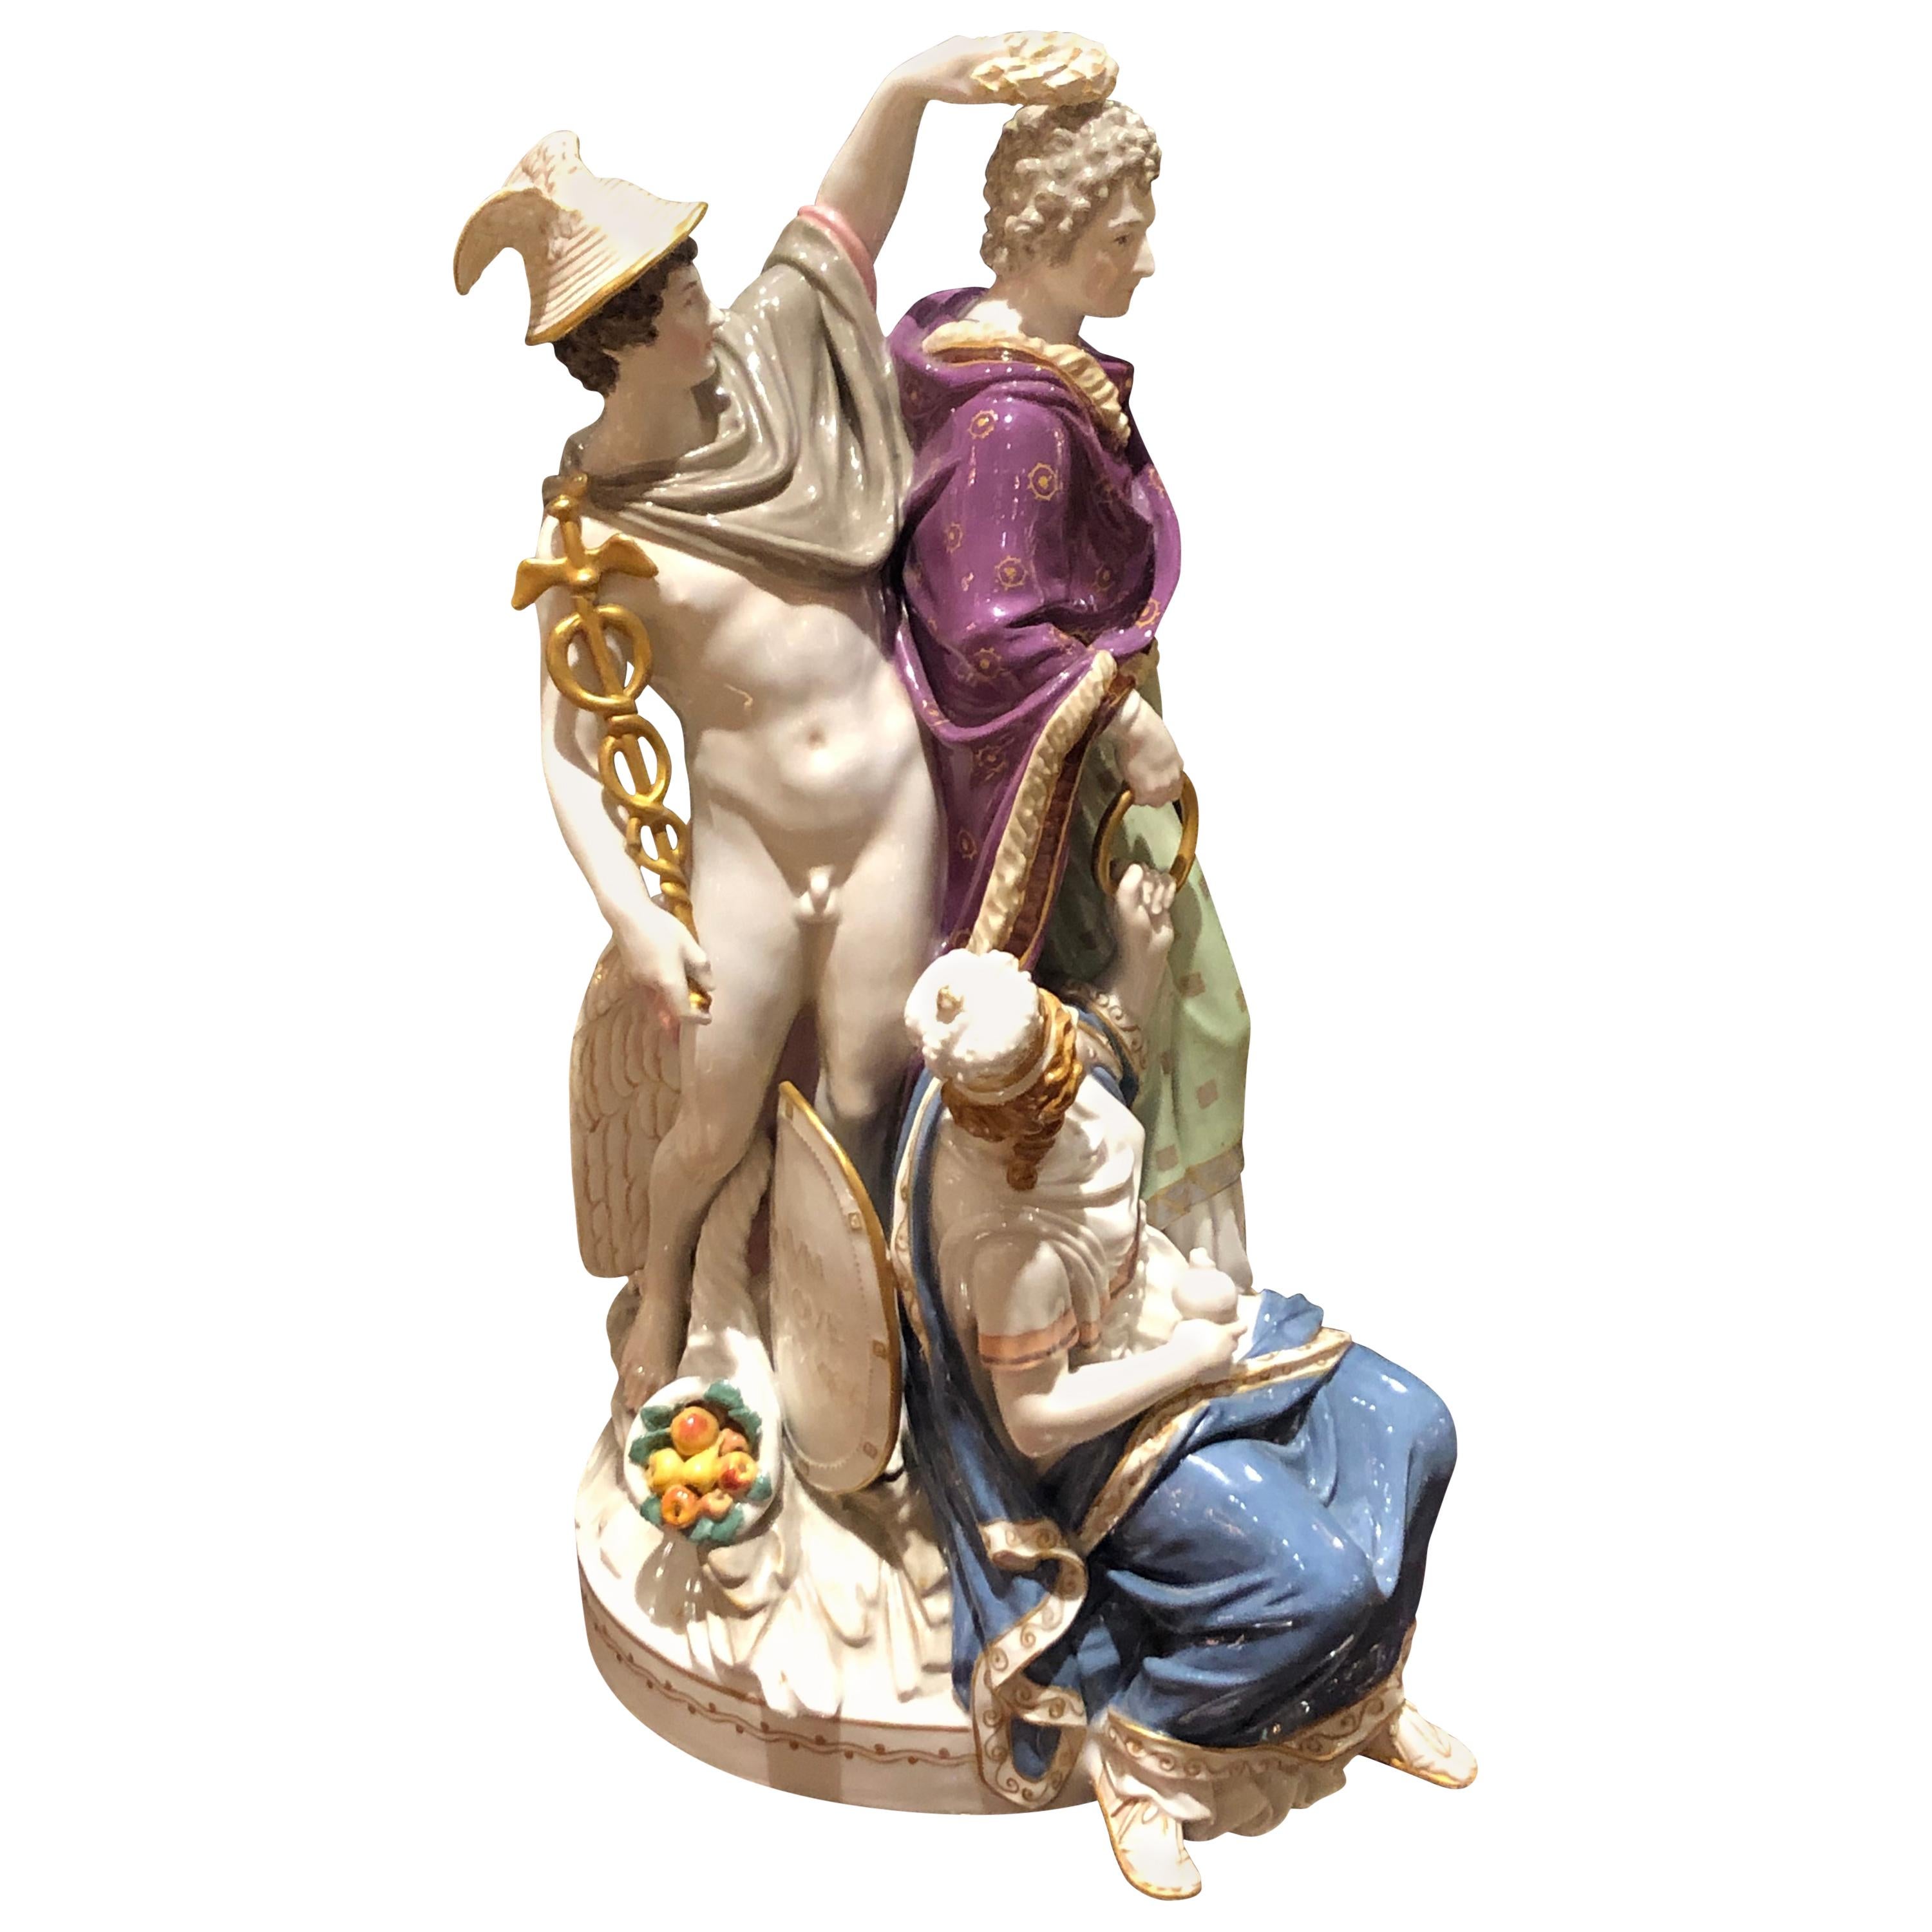 KPM Porcelain Figurines Group of the Crowning of Caesar For Sale